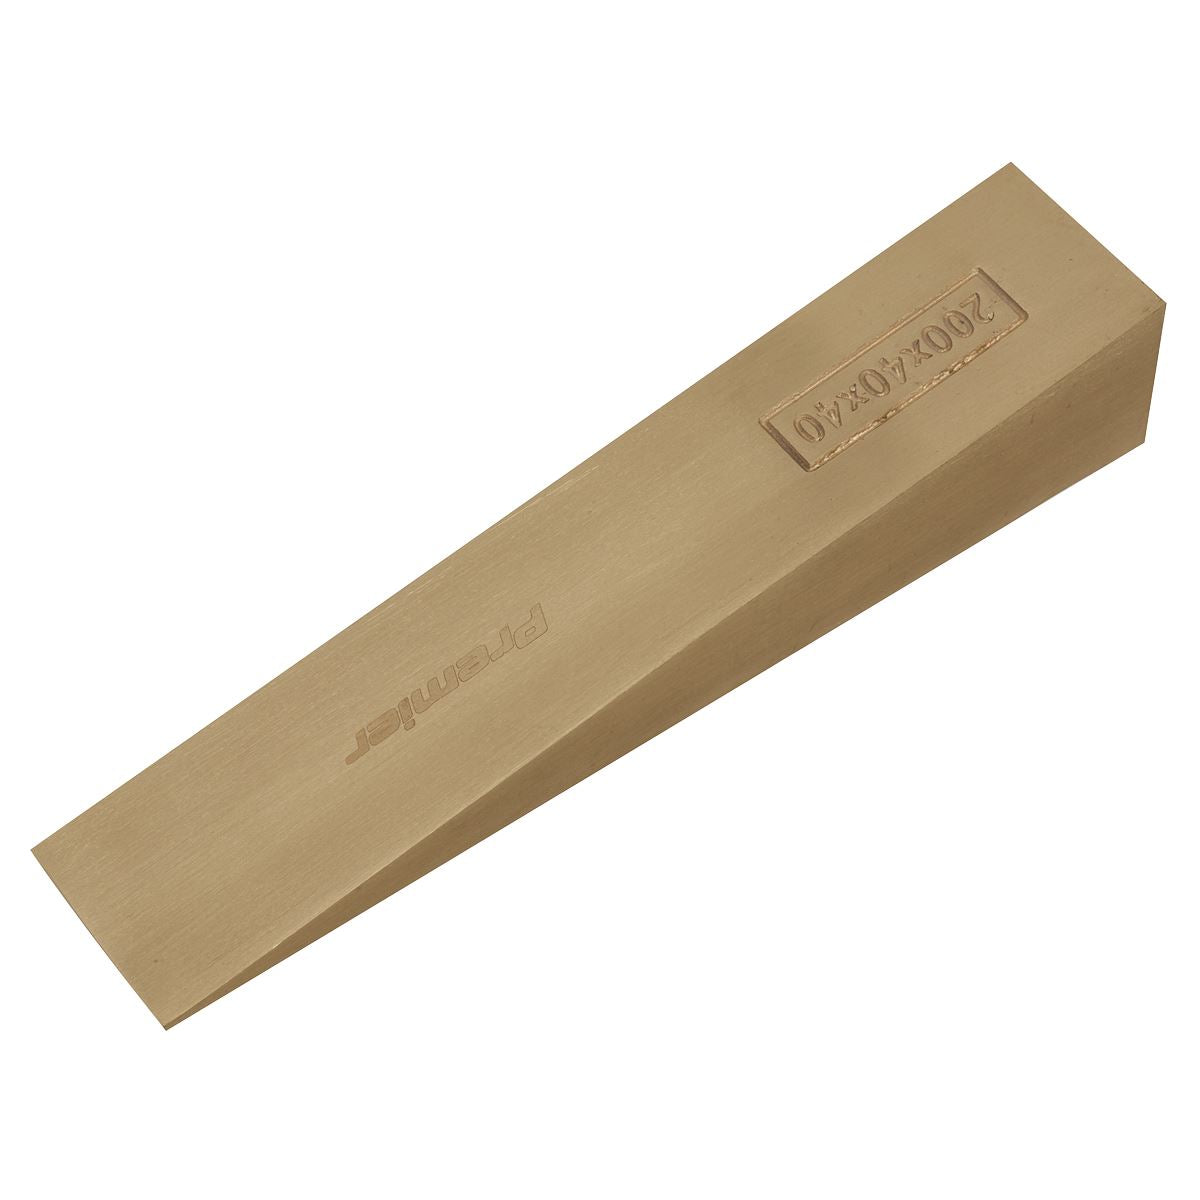 Sealey Premier Wedge 200 x 40 x 40mm - Non-Sparking